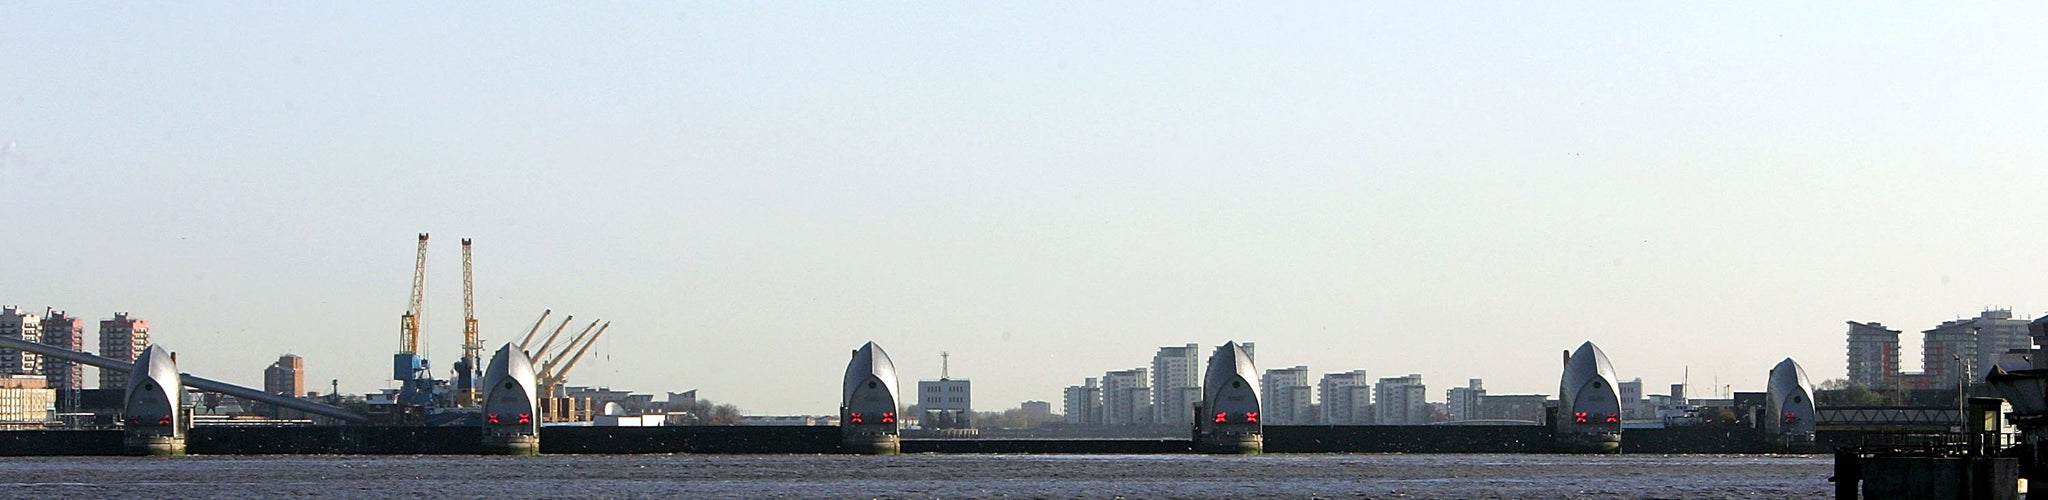 The Thames barrier raised in 2007 in response to a flood threat